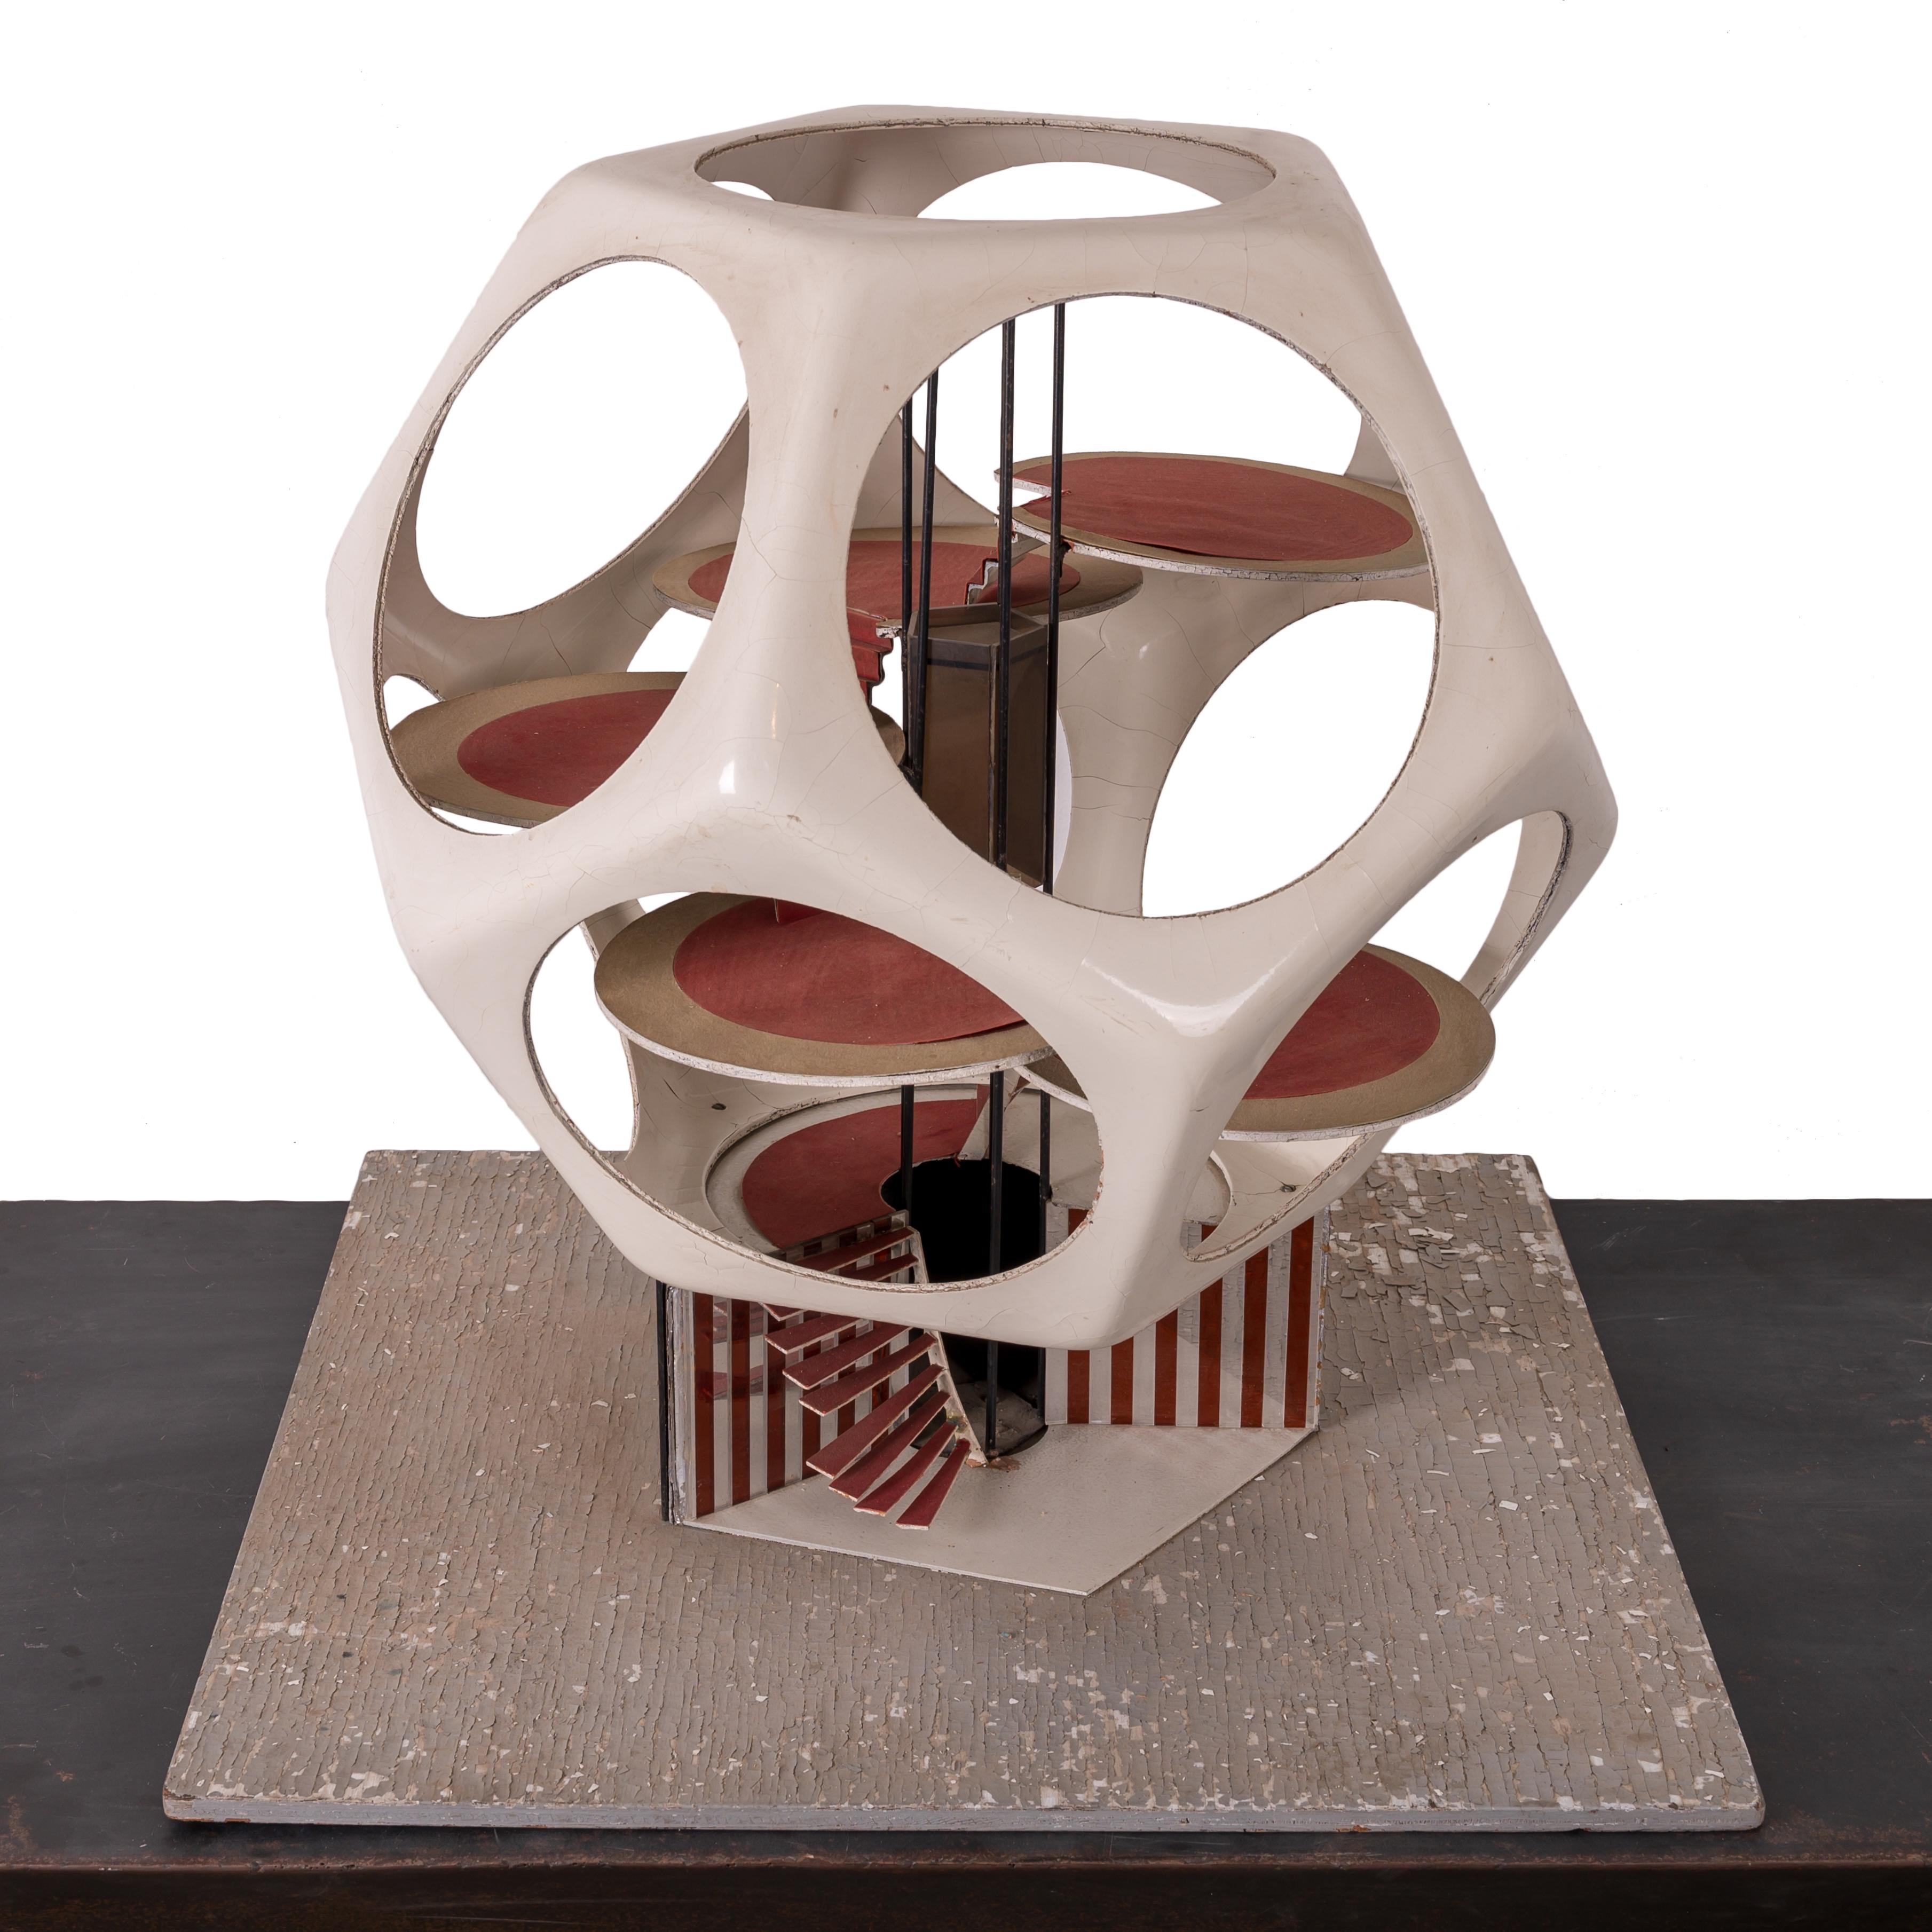 Giovanni 'John' Bucci
(Italian-American, 1935-2019)

A futuristic dodecahedron house model.  
fiberglass, acrylic, steel and various media

The house measures 25 inches wide and deep by 25 inches tall.
Mounted on board which measures 27 inches